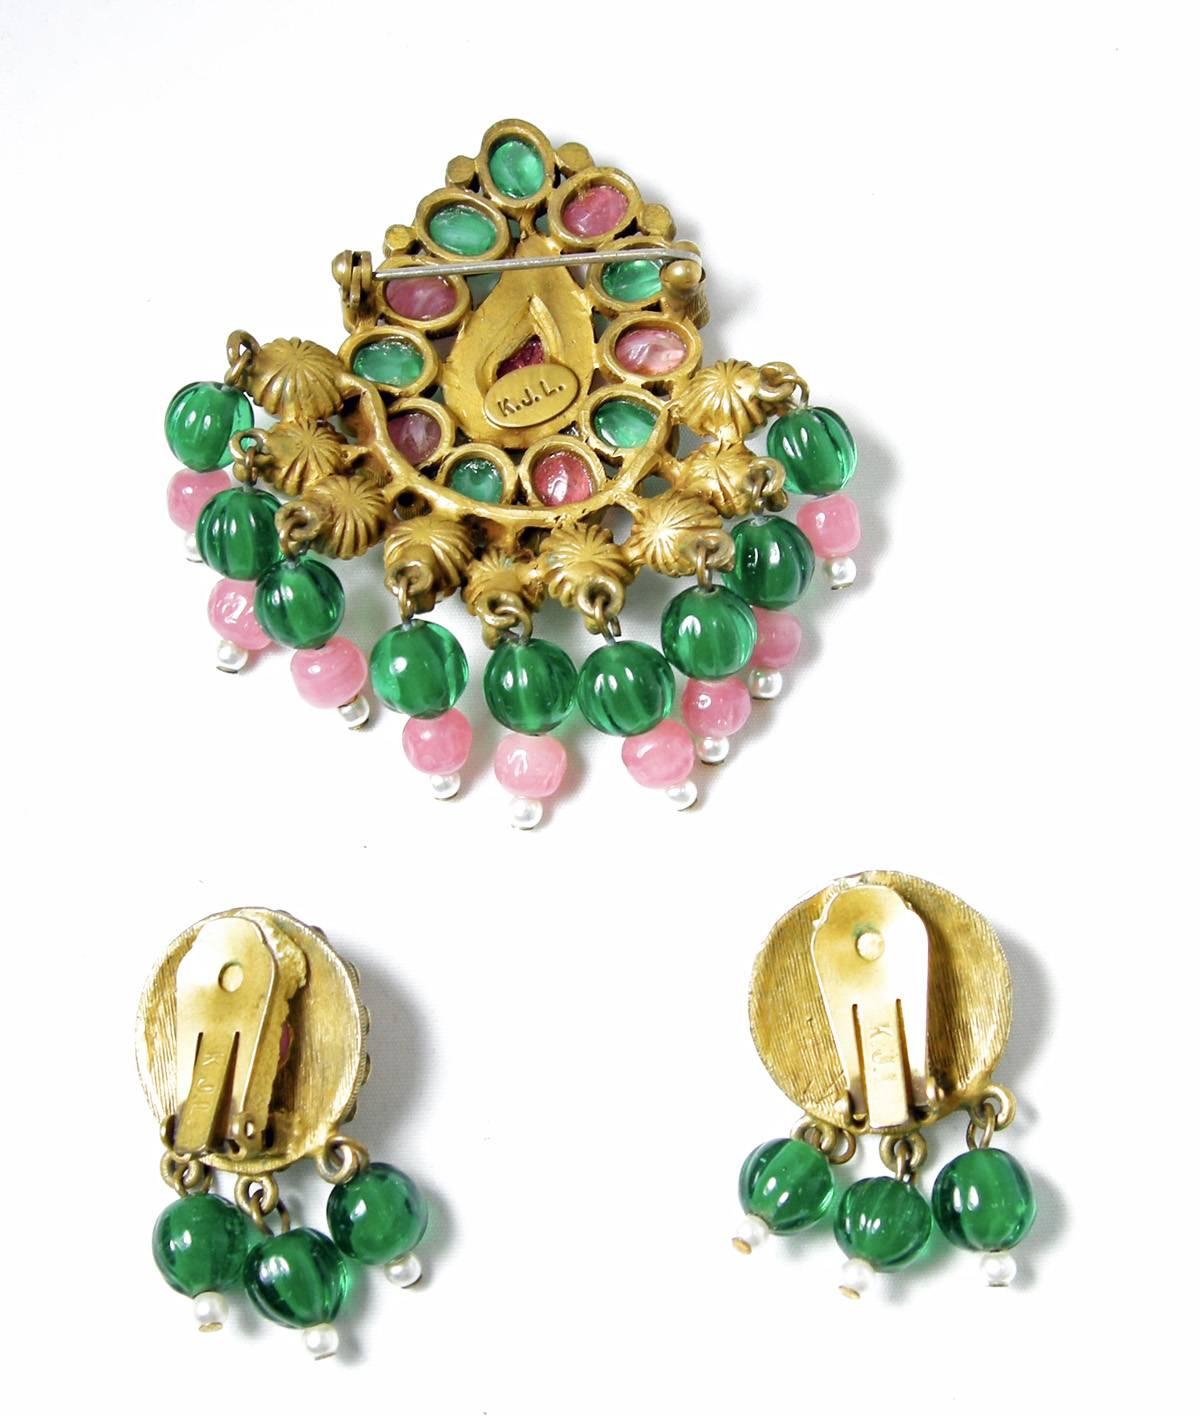 This is a rare and collectible Kenneth Jay Lane brooch and clip earrings set from the 1960s.  It is designed with pink and green poured glass with dangling faux pearls and green and pink poured glass beads at the bottom.  It is set in an antique